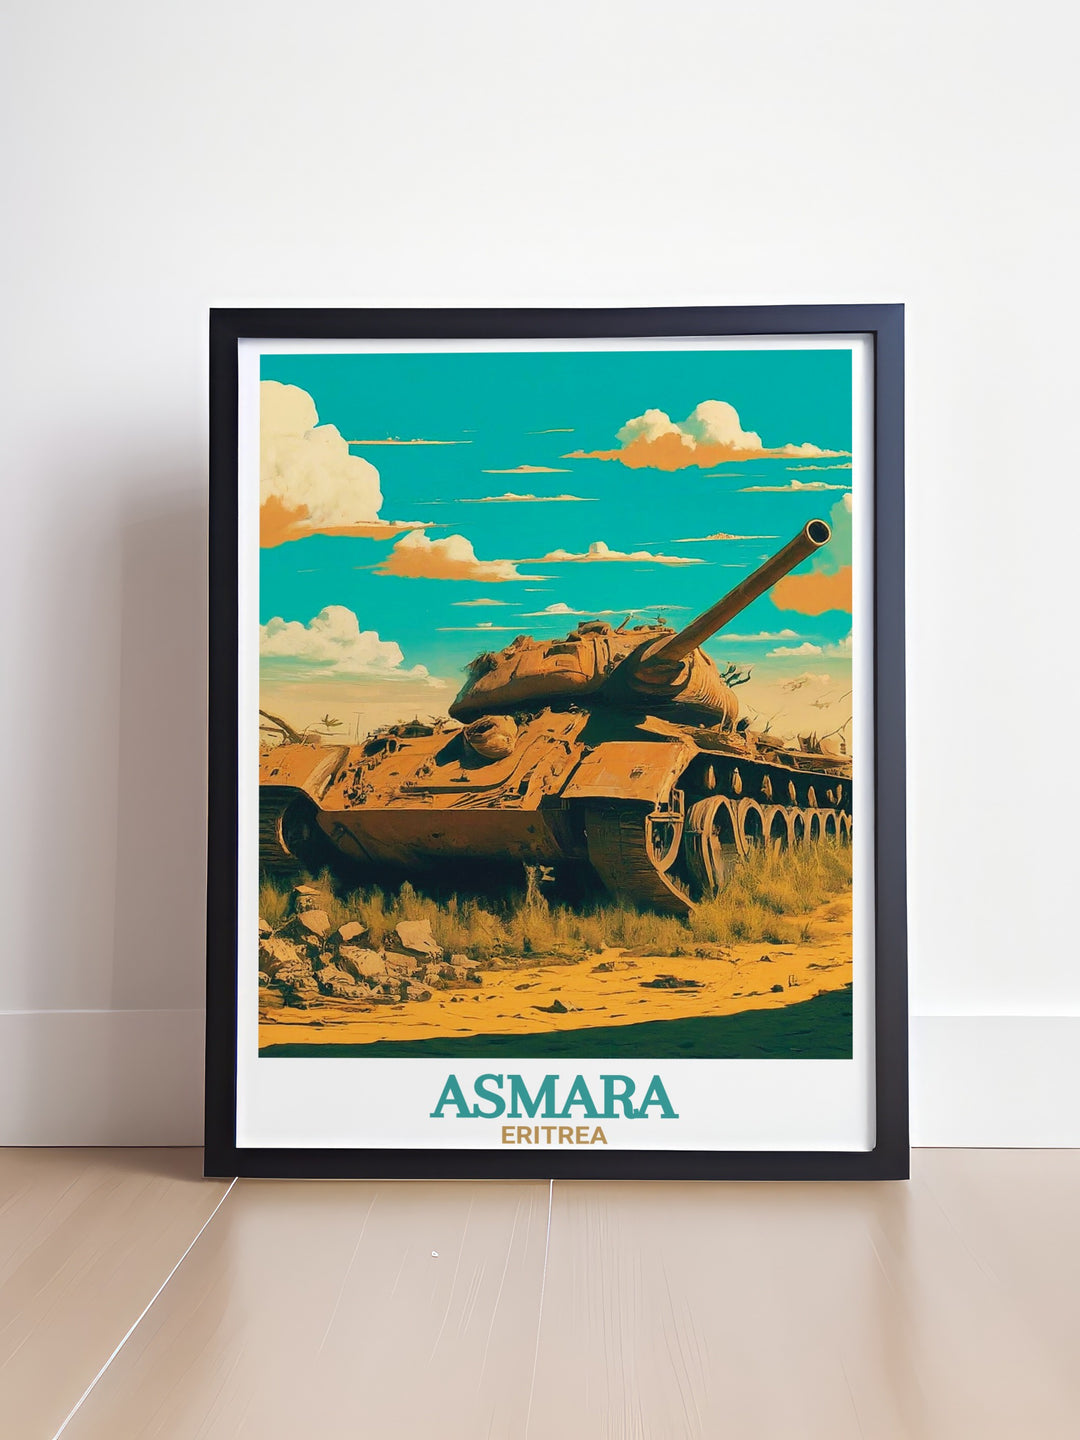 Stunning modern art print of Tank Graveyard set against Asmara cityscape, perfect for collectors of unique historical artworks.